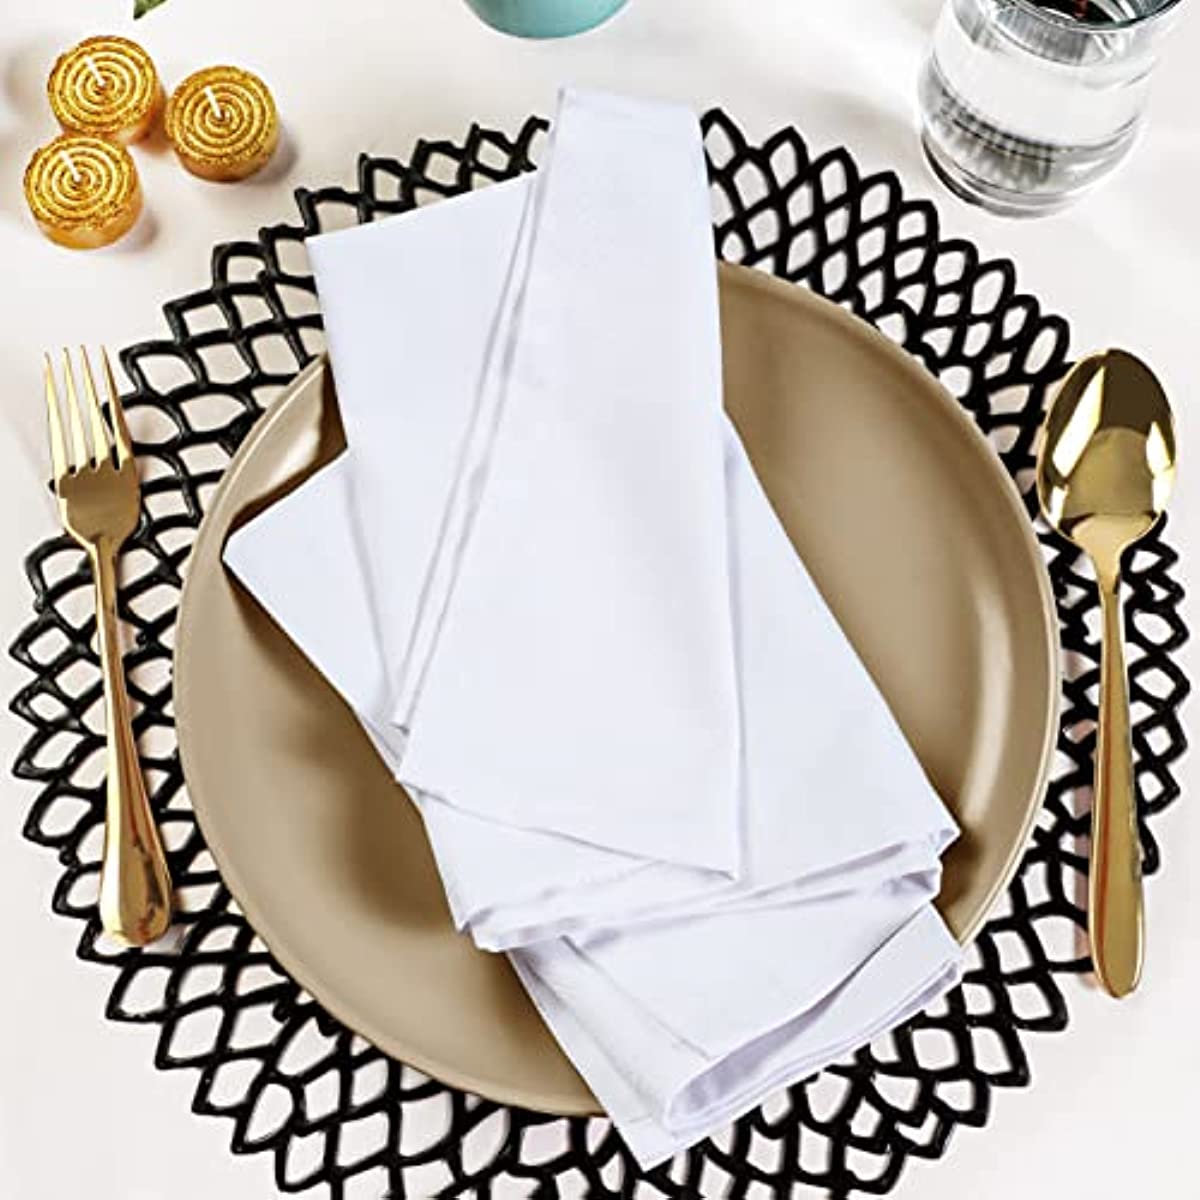 Kitchen Cloth Napkins 12 Pack 18X18 Inches Cotton Blend Soft Fabric with  Hemmed Edges, White Dinner Napkins Washable Reusable Durable Linen Napkins